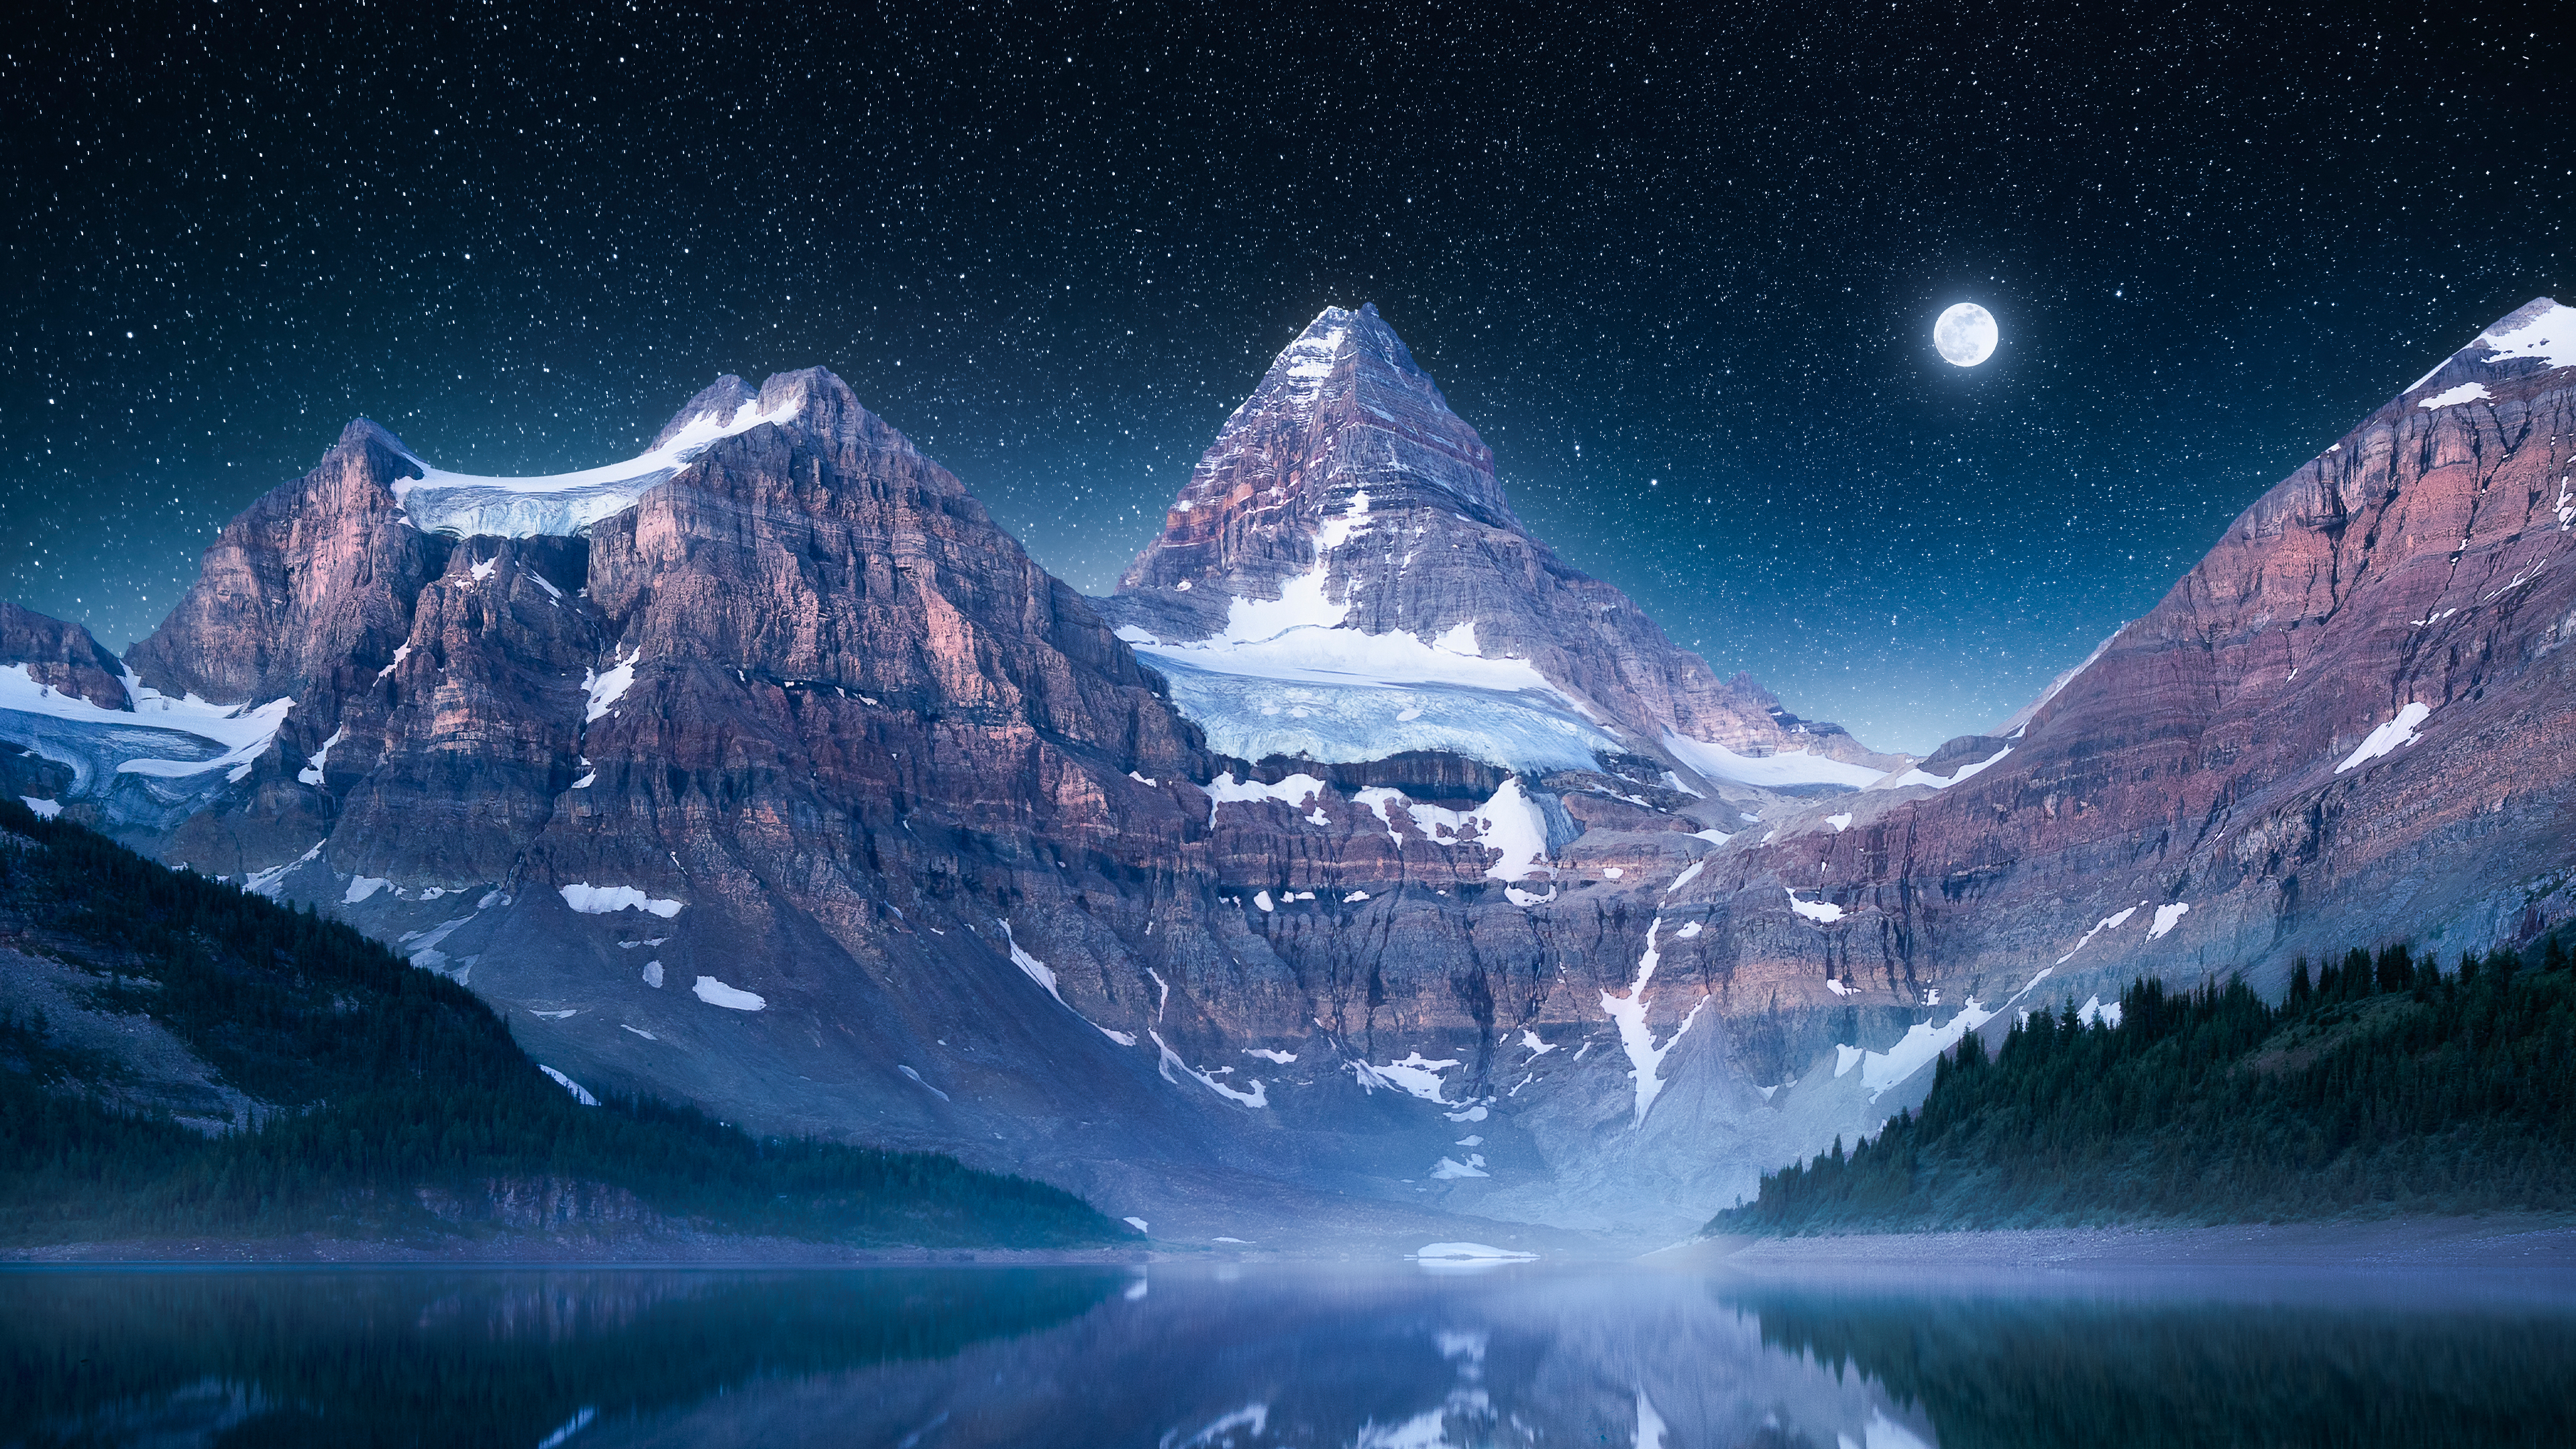 General 3840x2160 blue dreamscape lake landscape mountains nature night nightscape Peru photography France